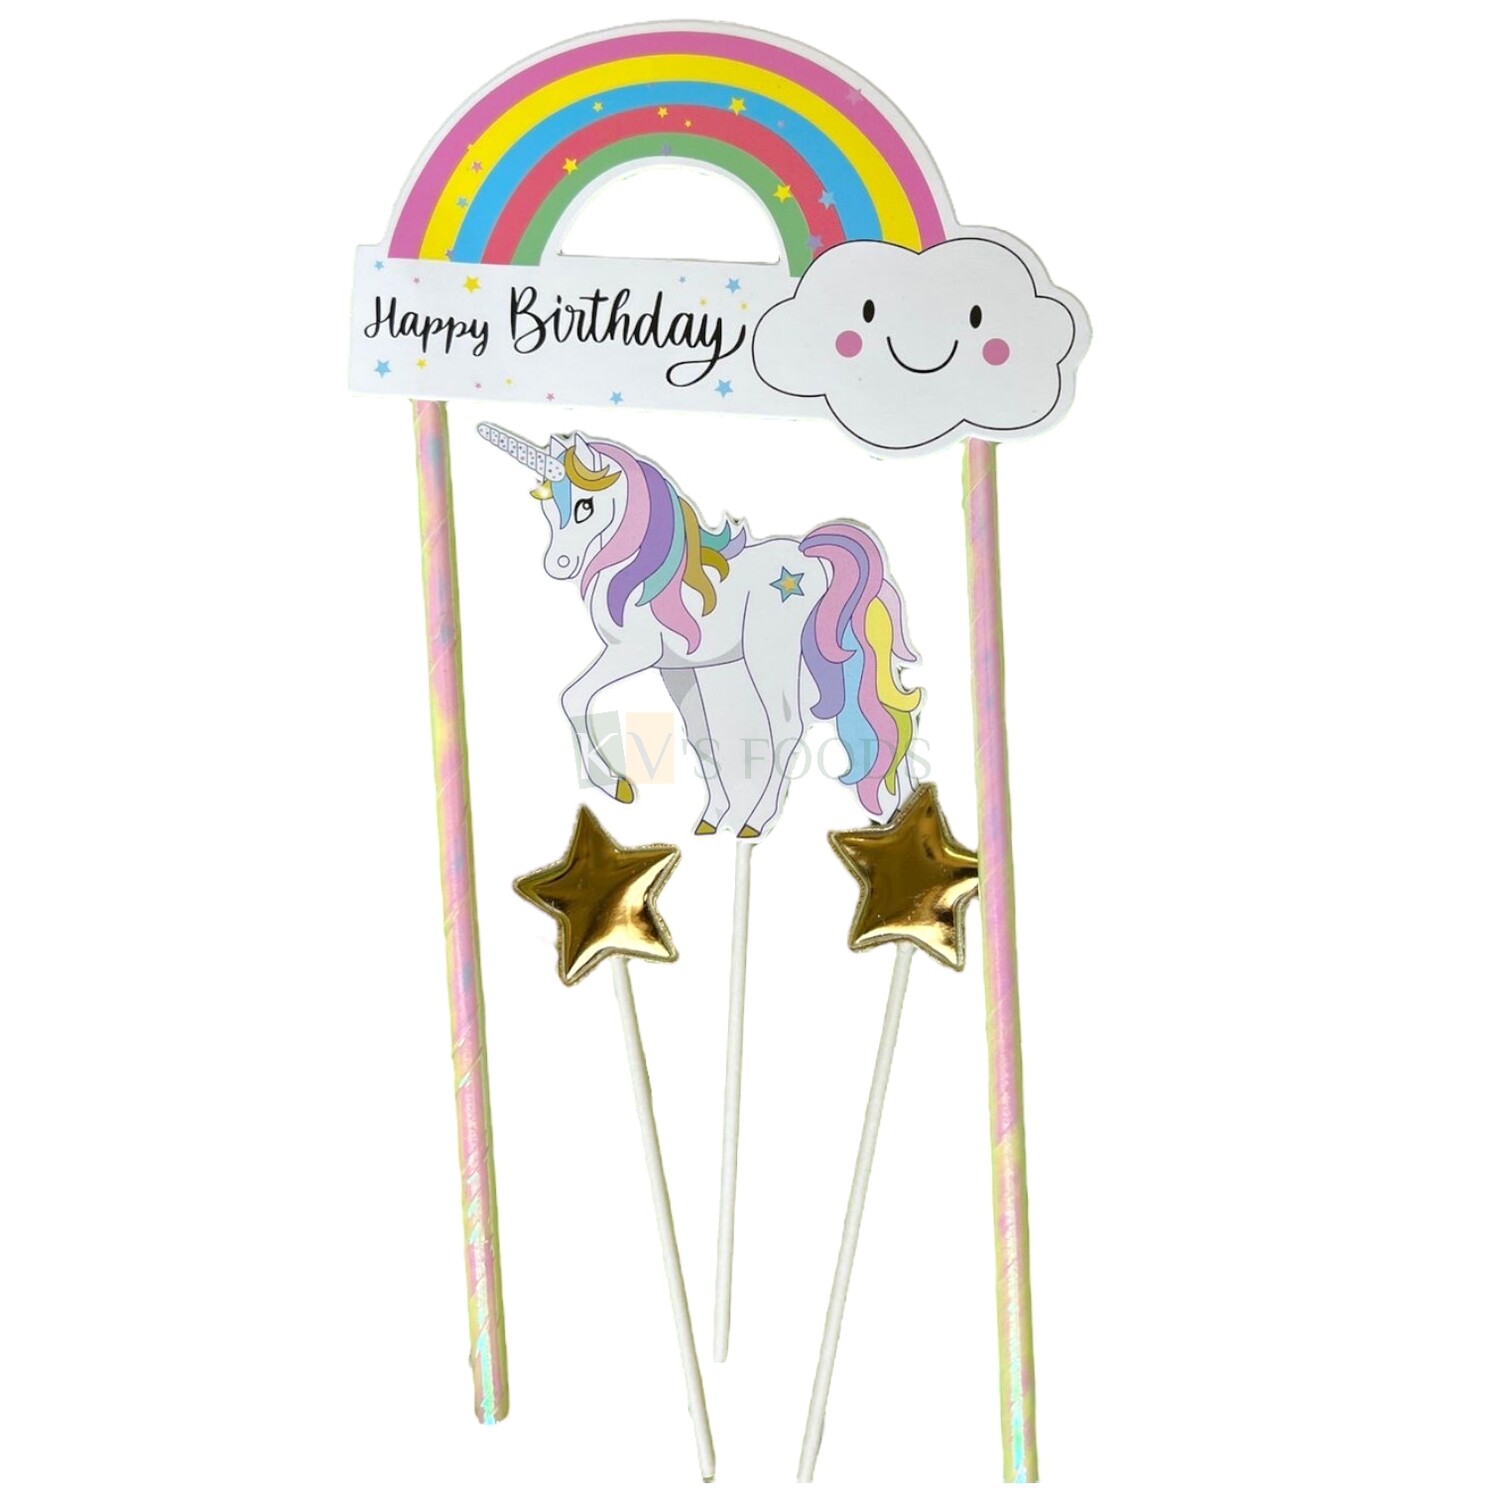 4PC Paper Cutout Happy Birthday Message Banner With Rainbow, Cloud & Unicorn and Stars Cake Topper Set, Cake Topper Insert, Cake Decoration Accessories, DIY Cake Decor.